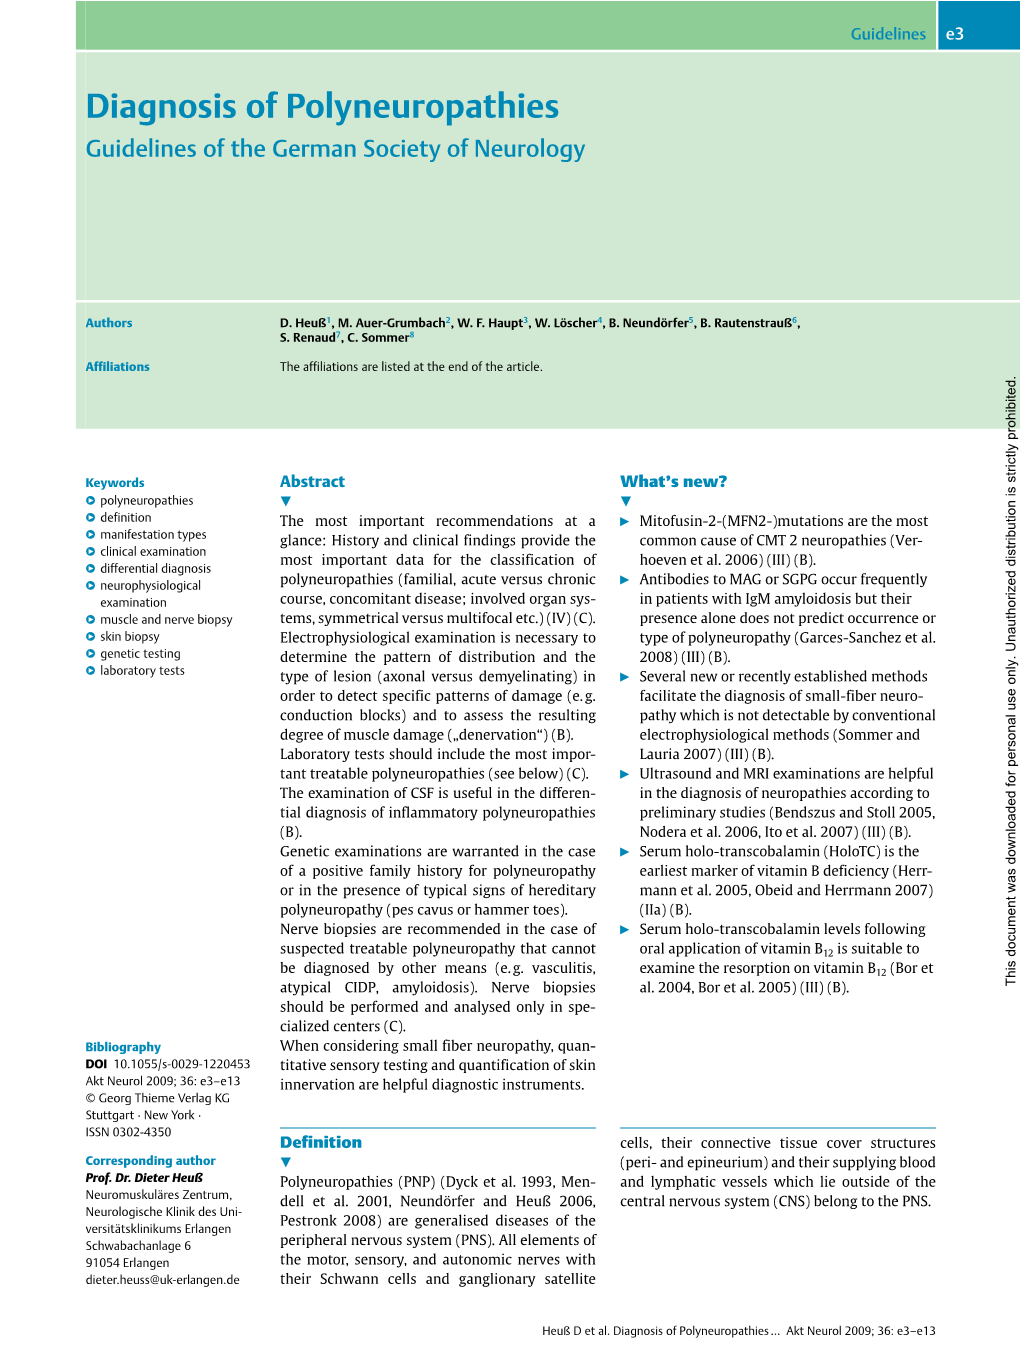 Diagnosis of Polyneuropathies Guidelines of the German Society of Neurology